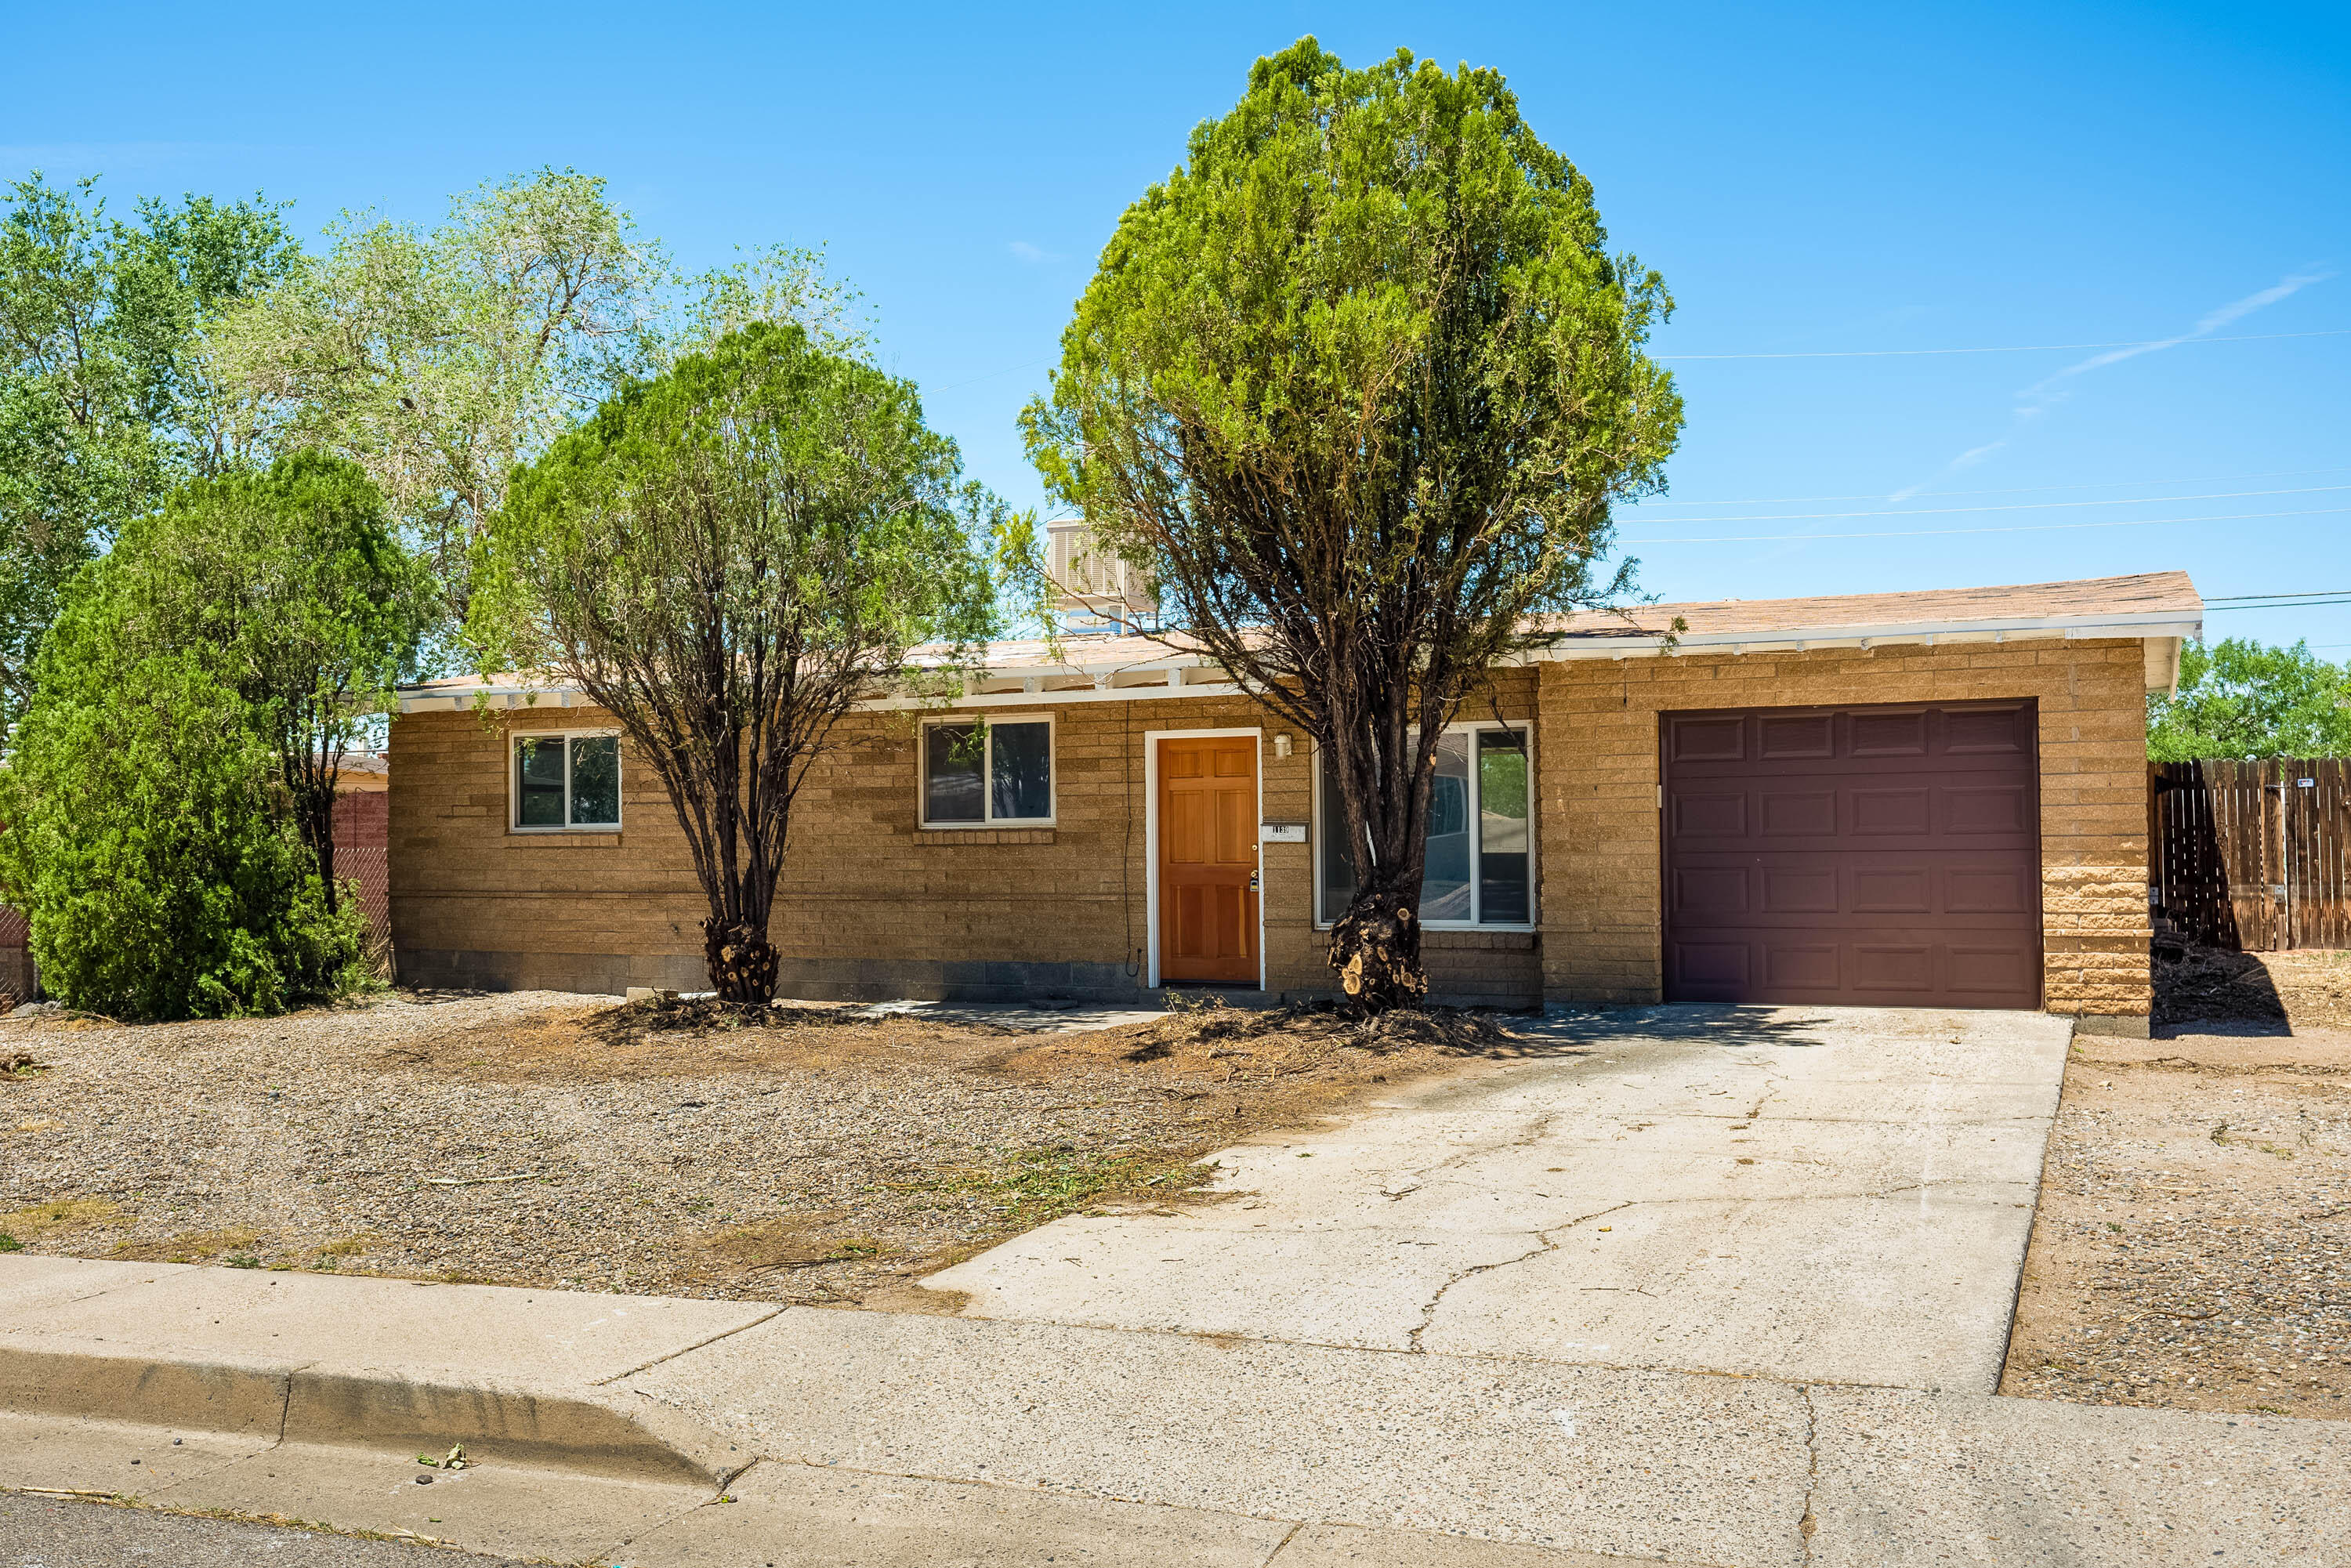 Recently updated 3 Bedroom 1 Bath home featuring newly installed kitchen cabinets/countertops, luxury vinyl flooring throughout, LED Lighting and spacious backyard. Bathroom has been remodeled with newly installed shower tile, flooring & vanity.